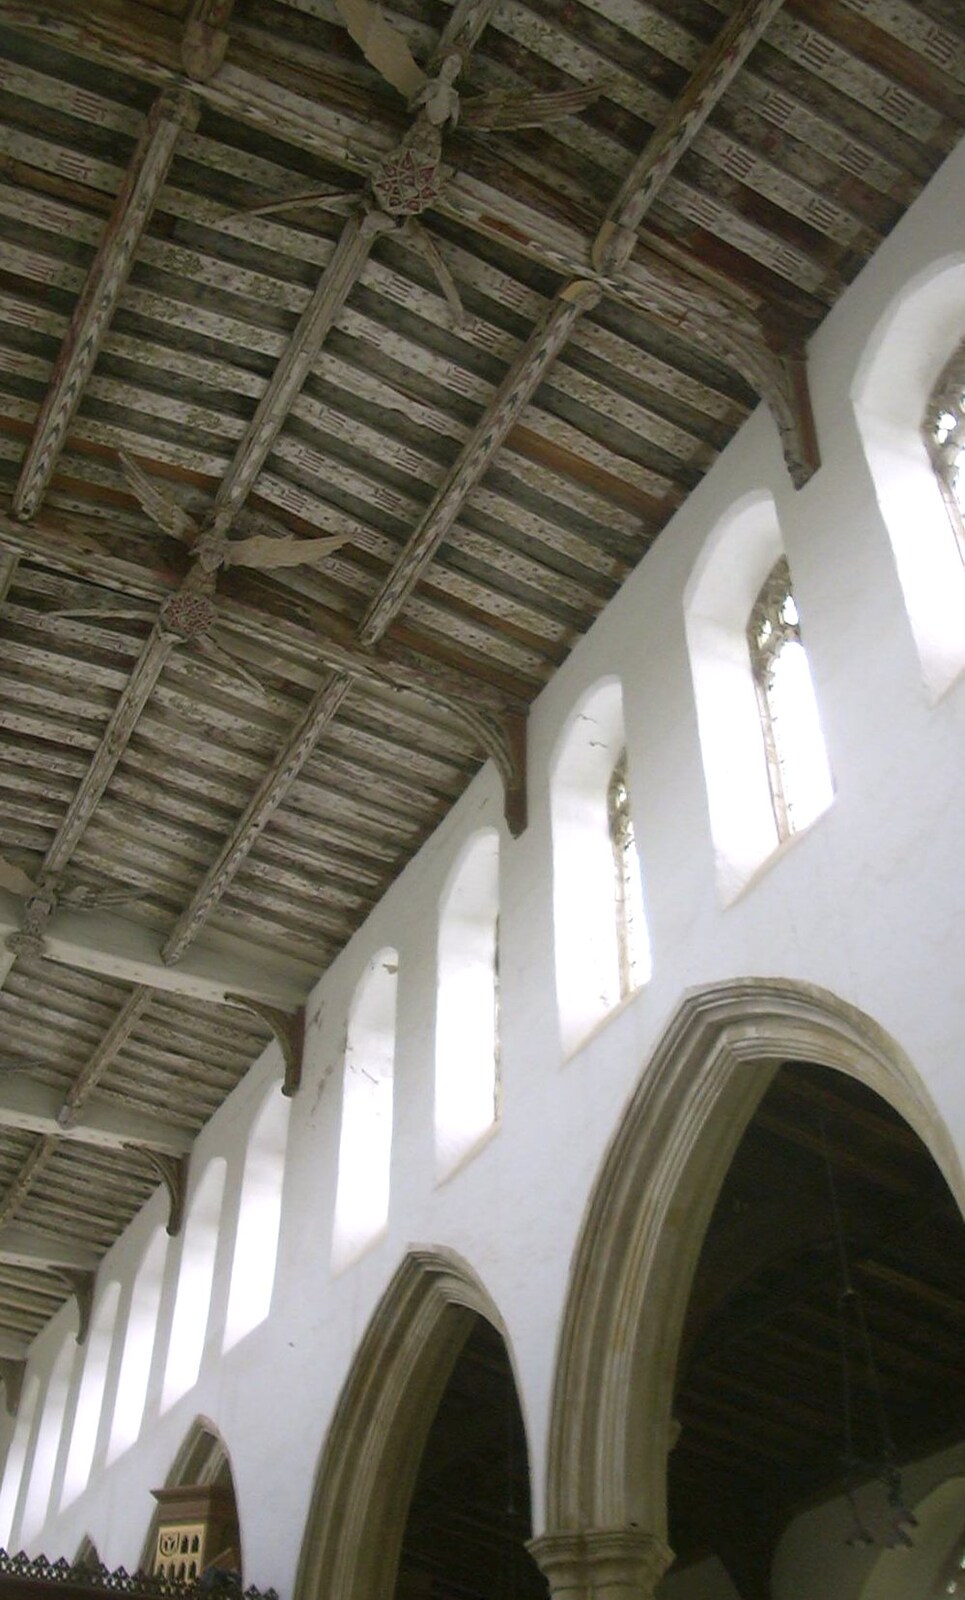 The roof of the church from Moping in Southwold, Suffolk - 3rd April 2004